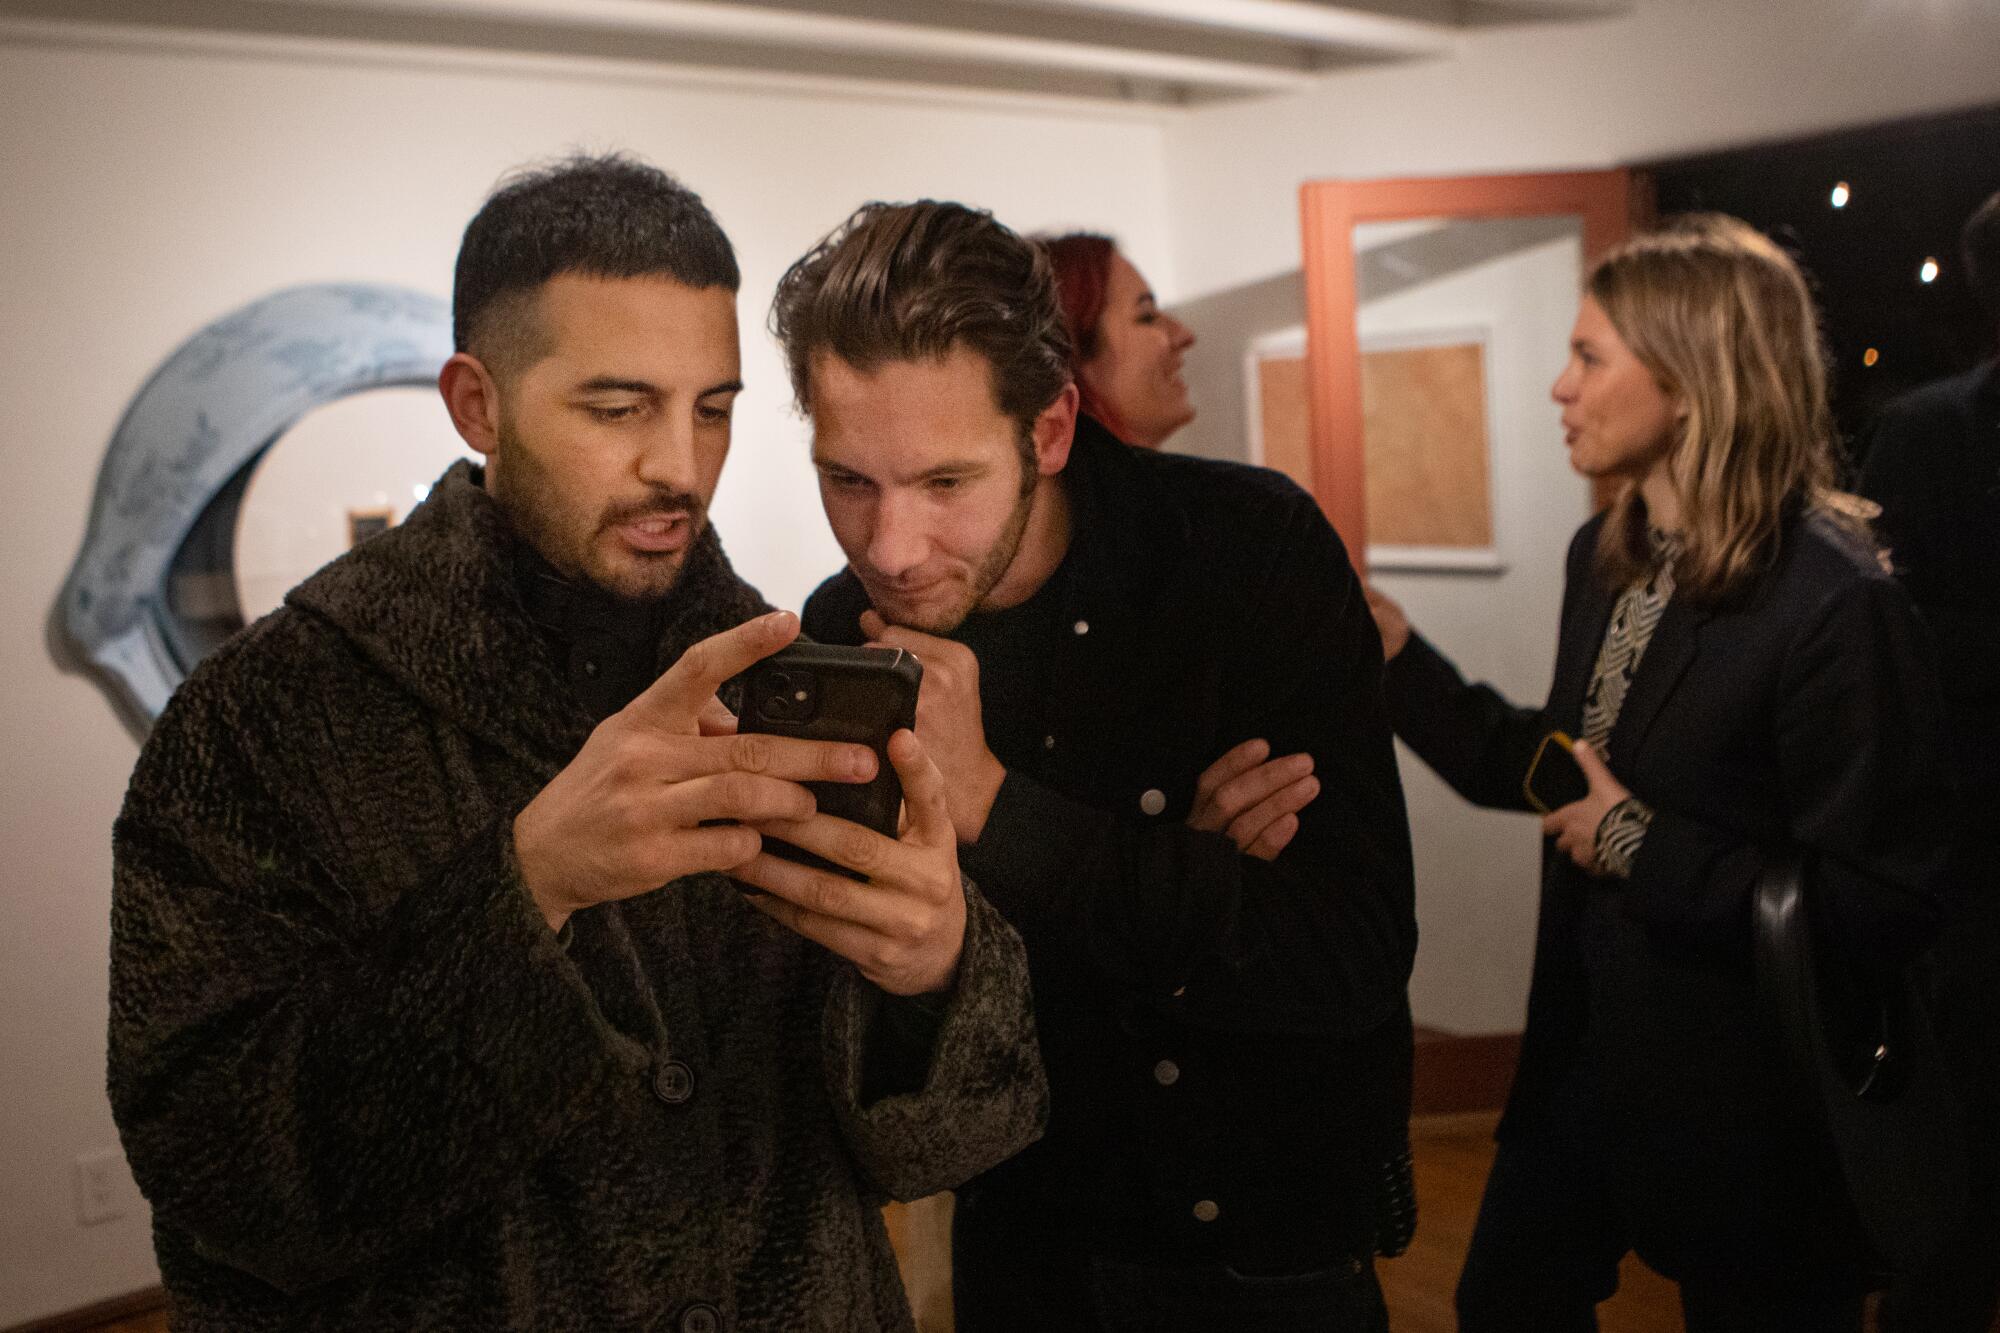 Two men in a gallery look at a phone while two women talk and laugh in the background